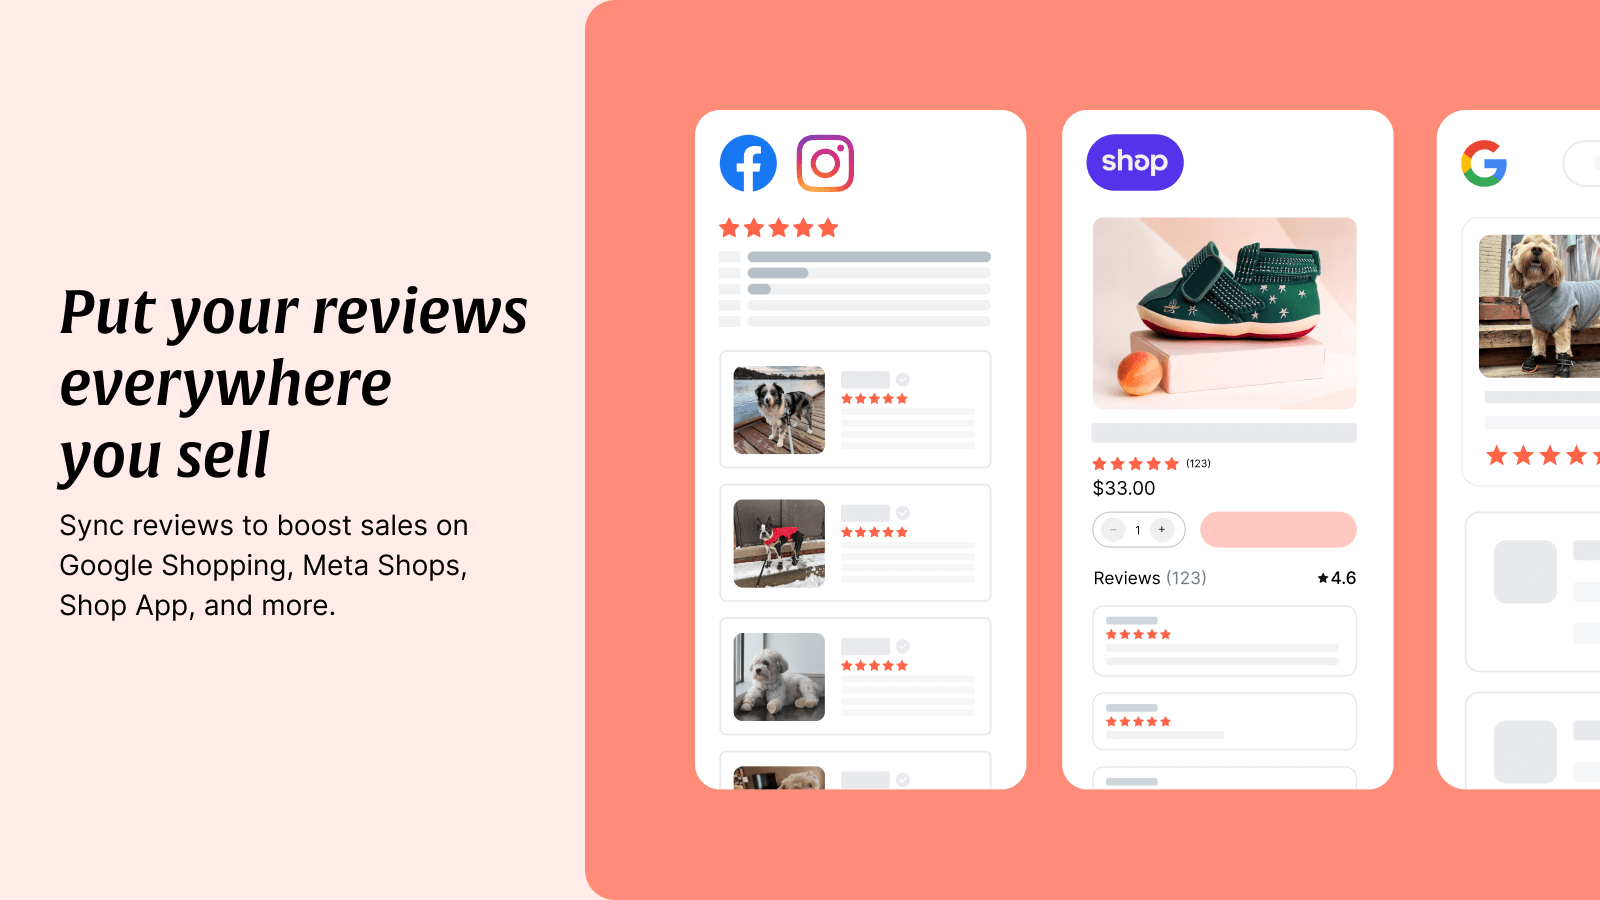 Sync reviews to Google Shopping, Meta Shops and the Shop App